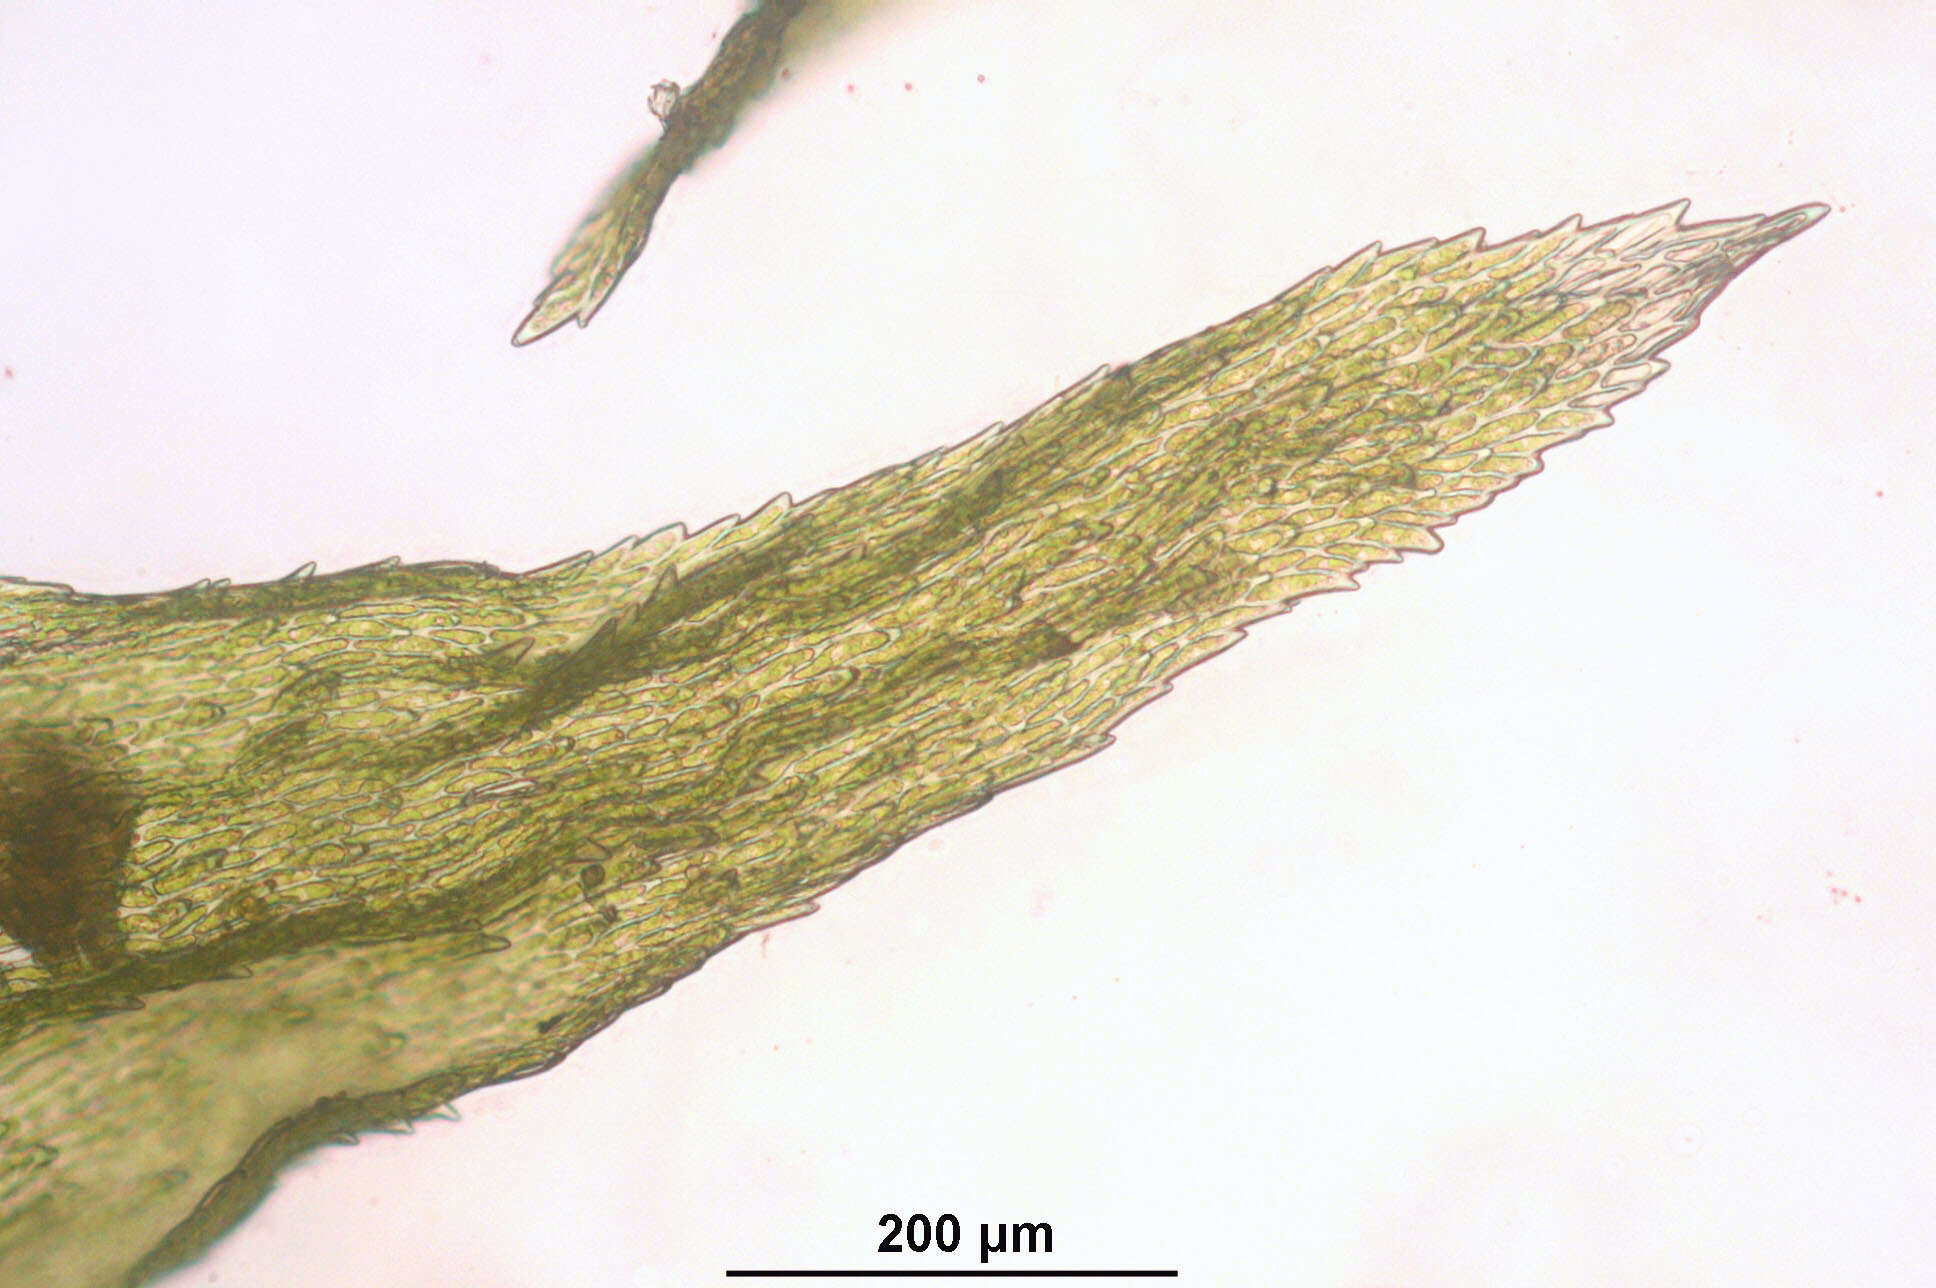 Image of Electrified Cat's Tail Moss